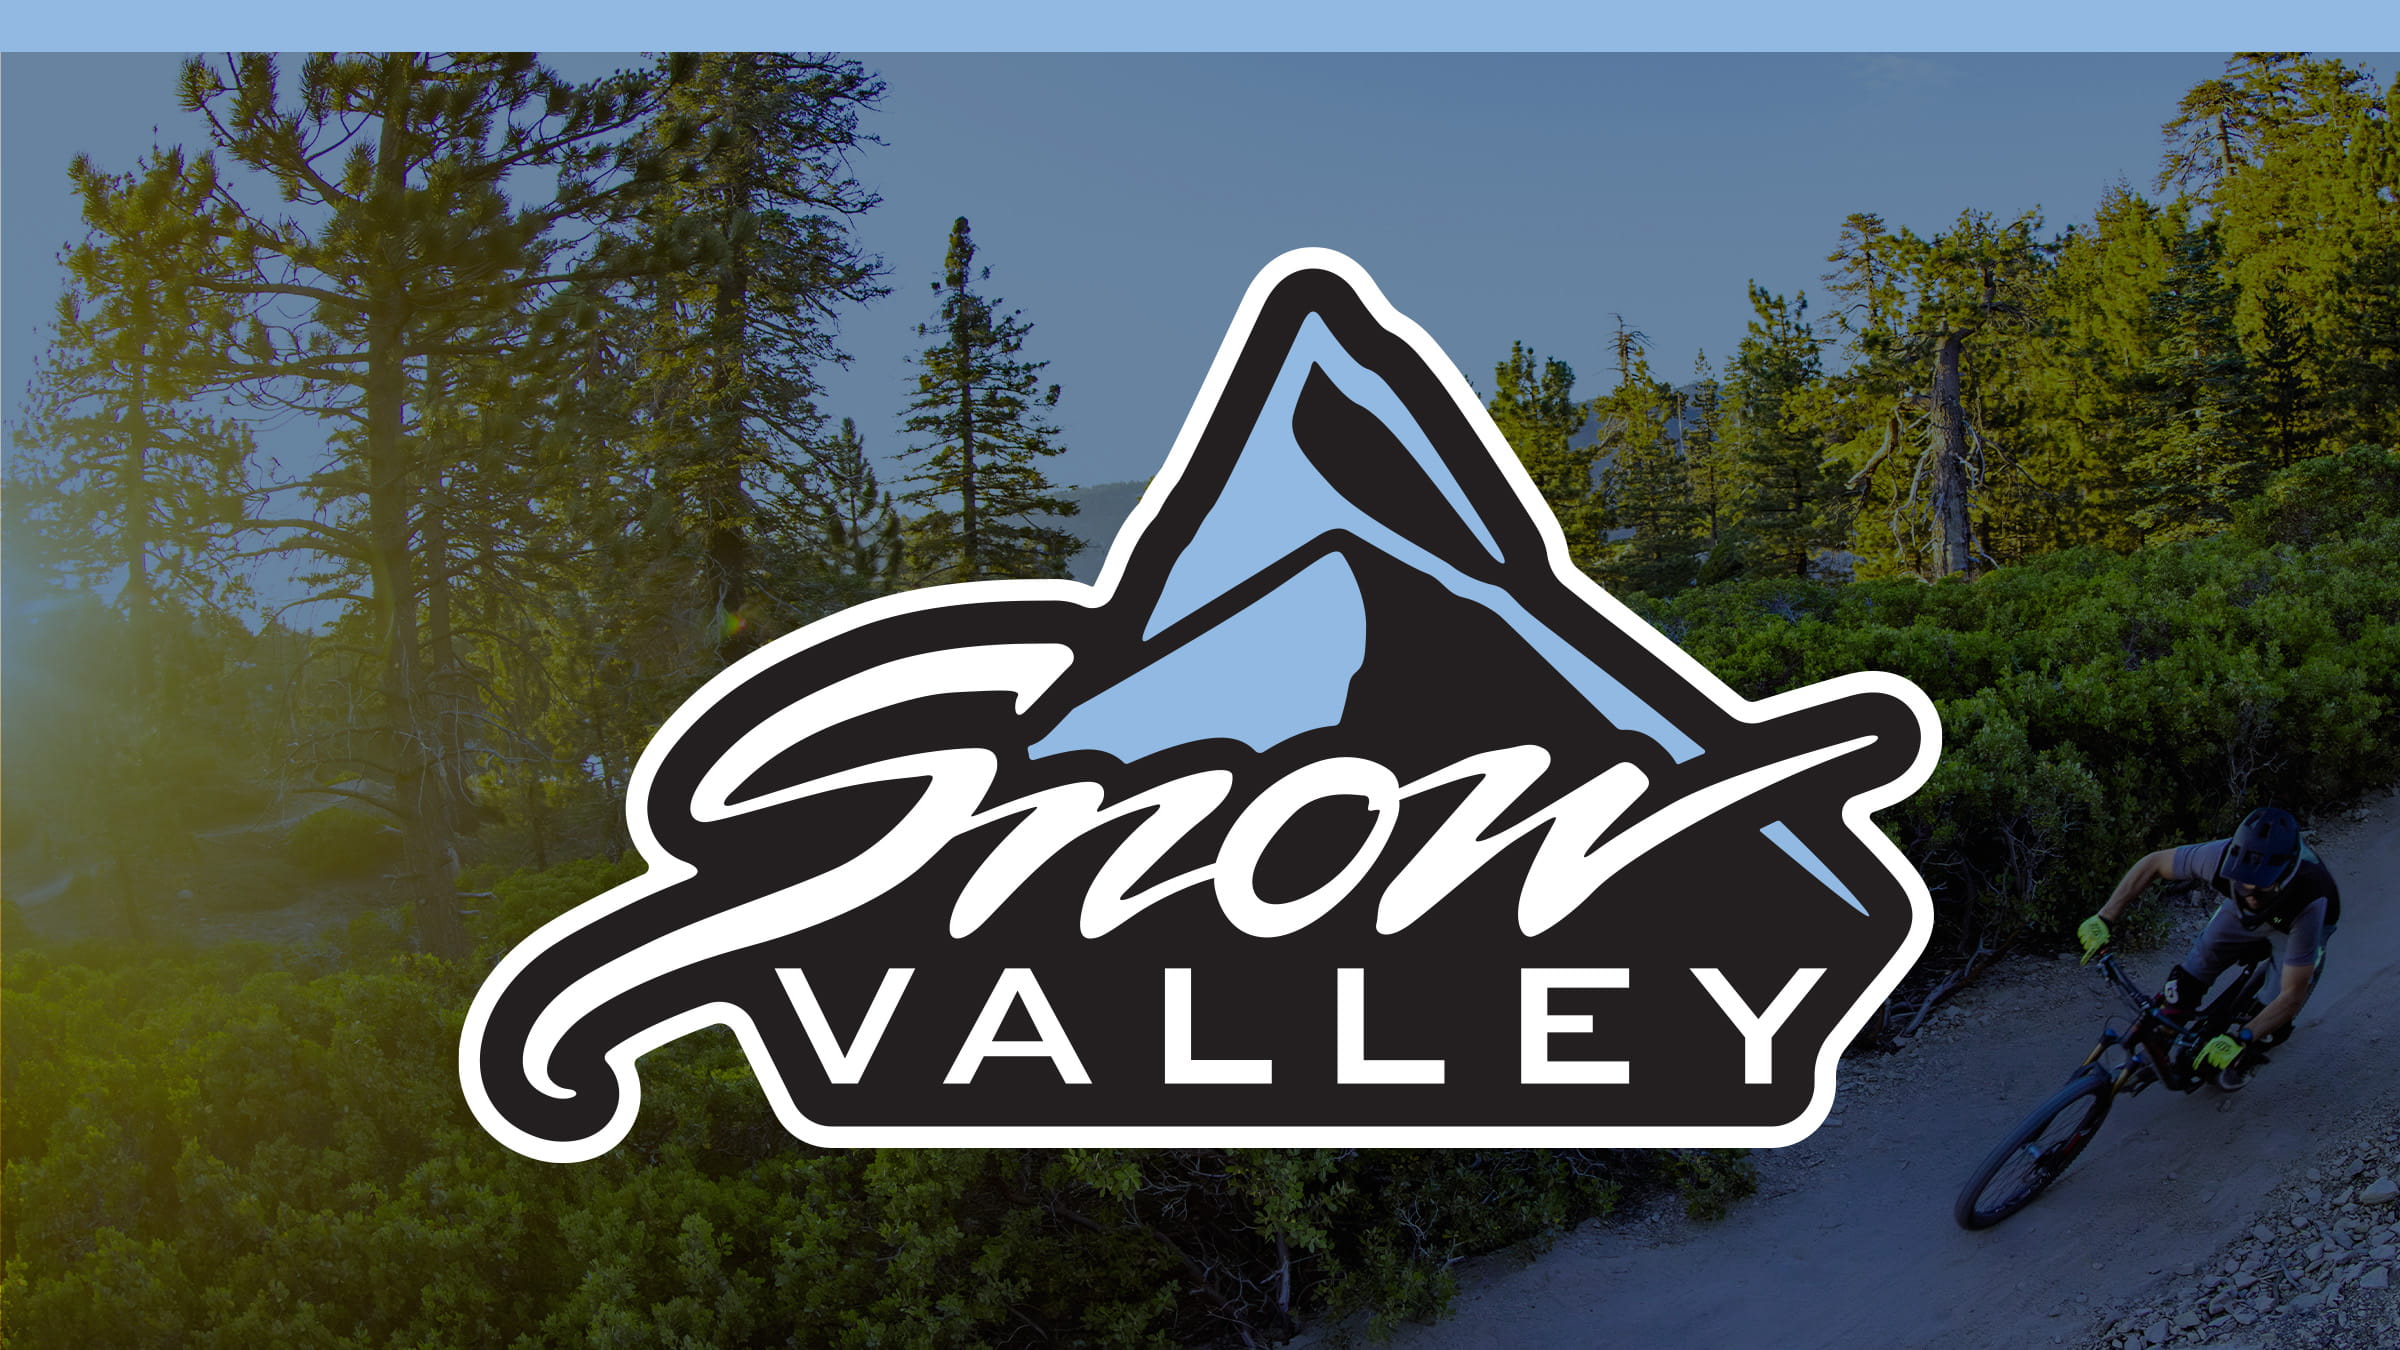 Blue overlay on a bike park image with the Snow Valley logo